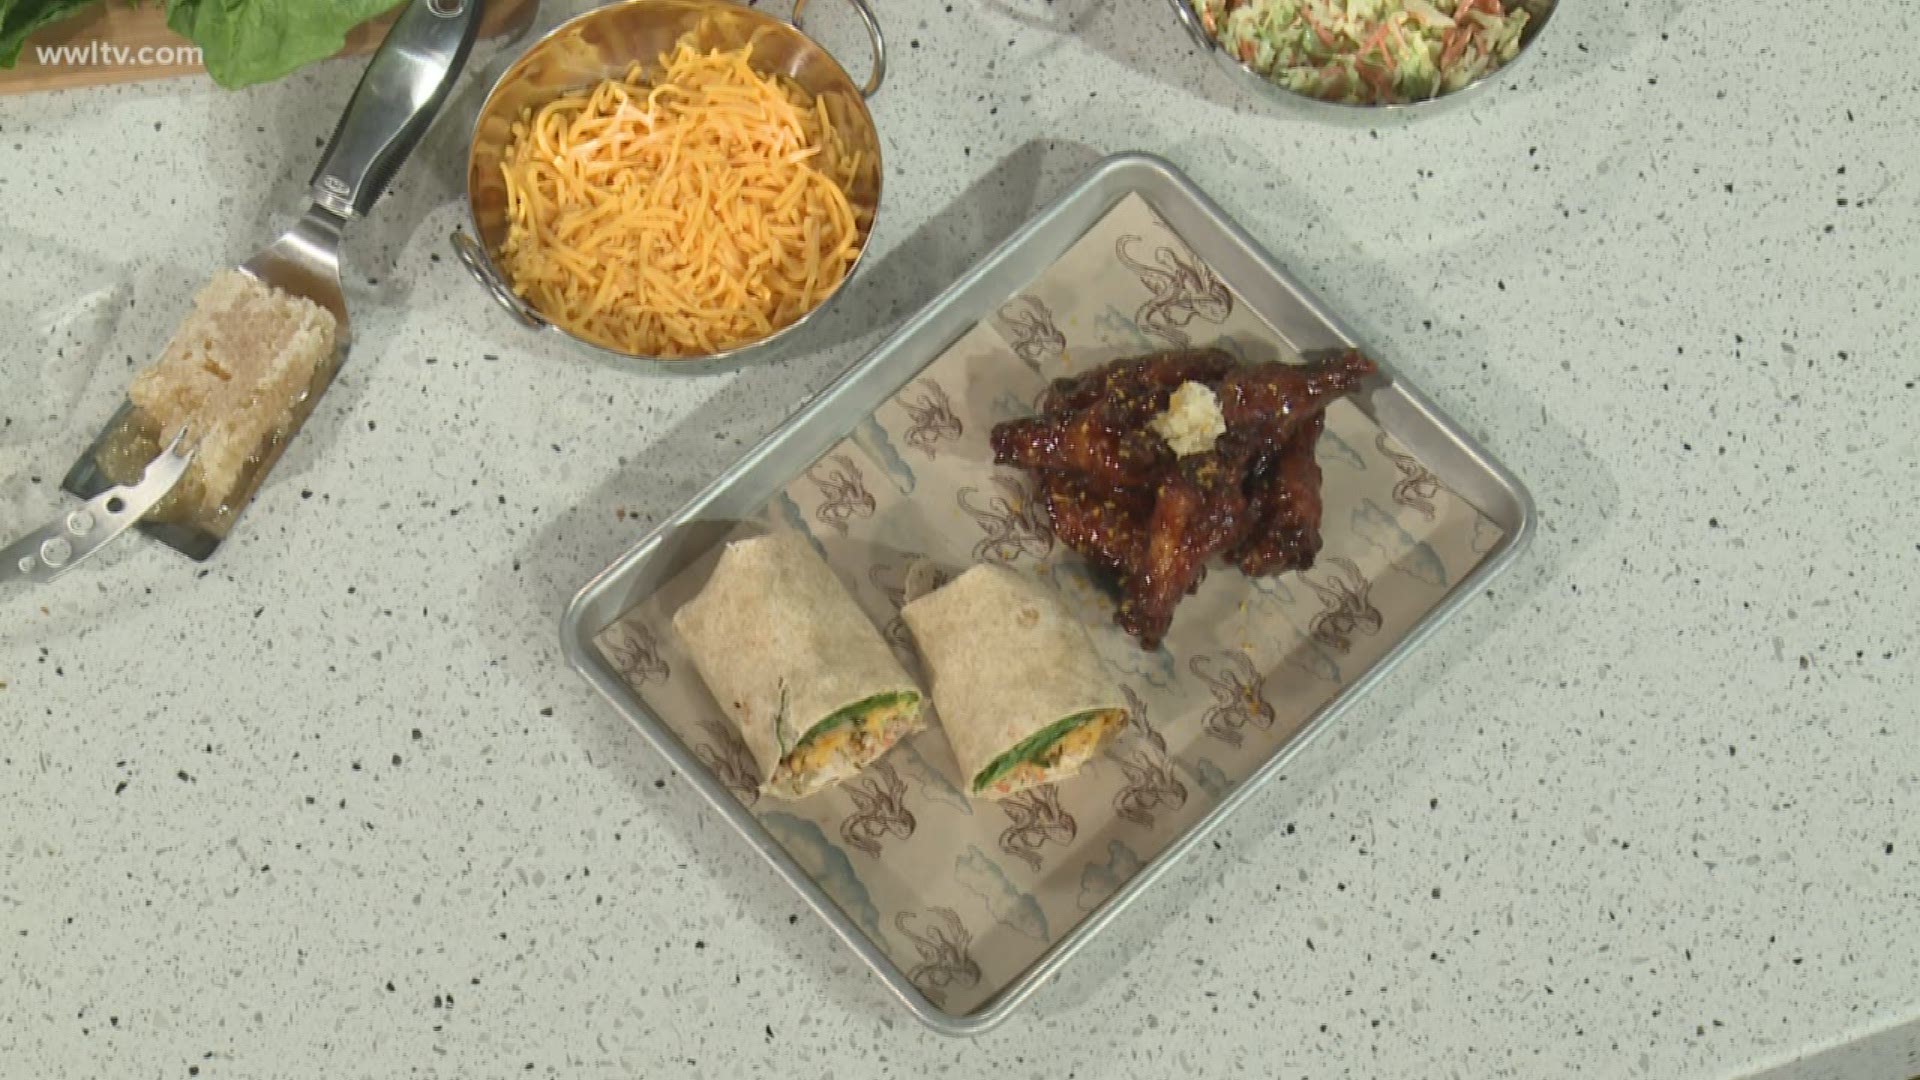 Brad Creel from WOW American Eats is in the kitchen with some snacks perfect for your summer break.